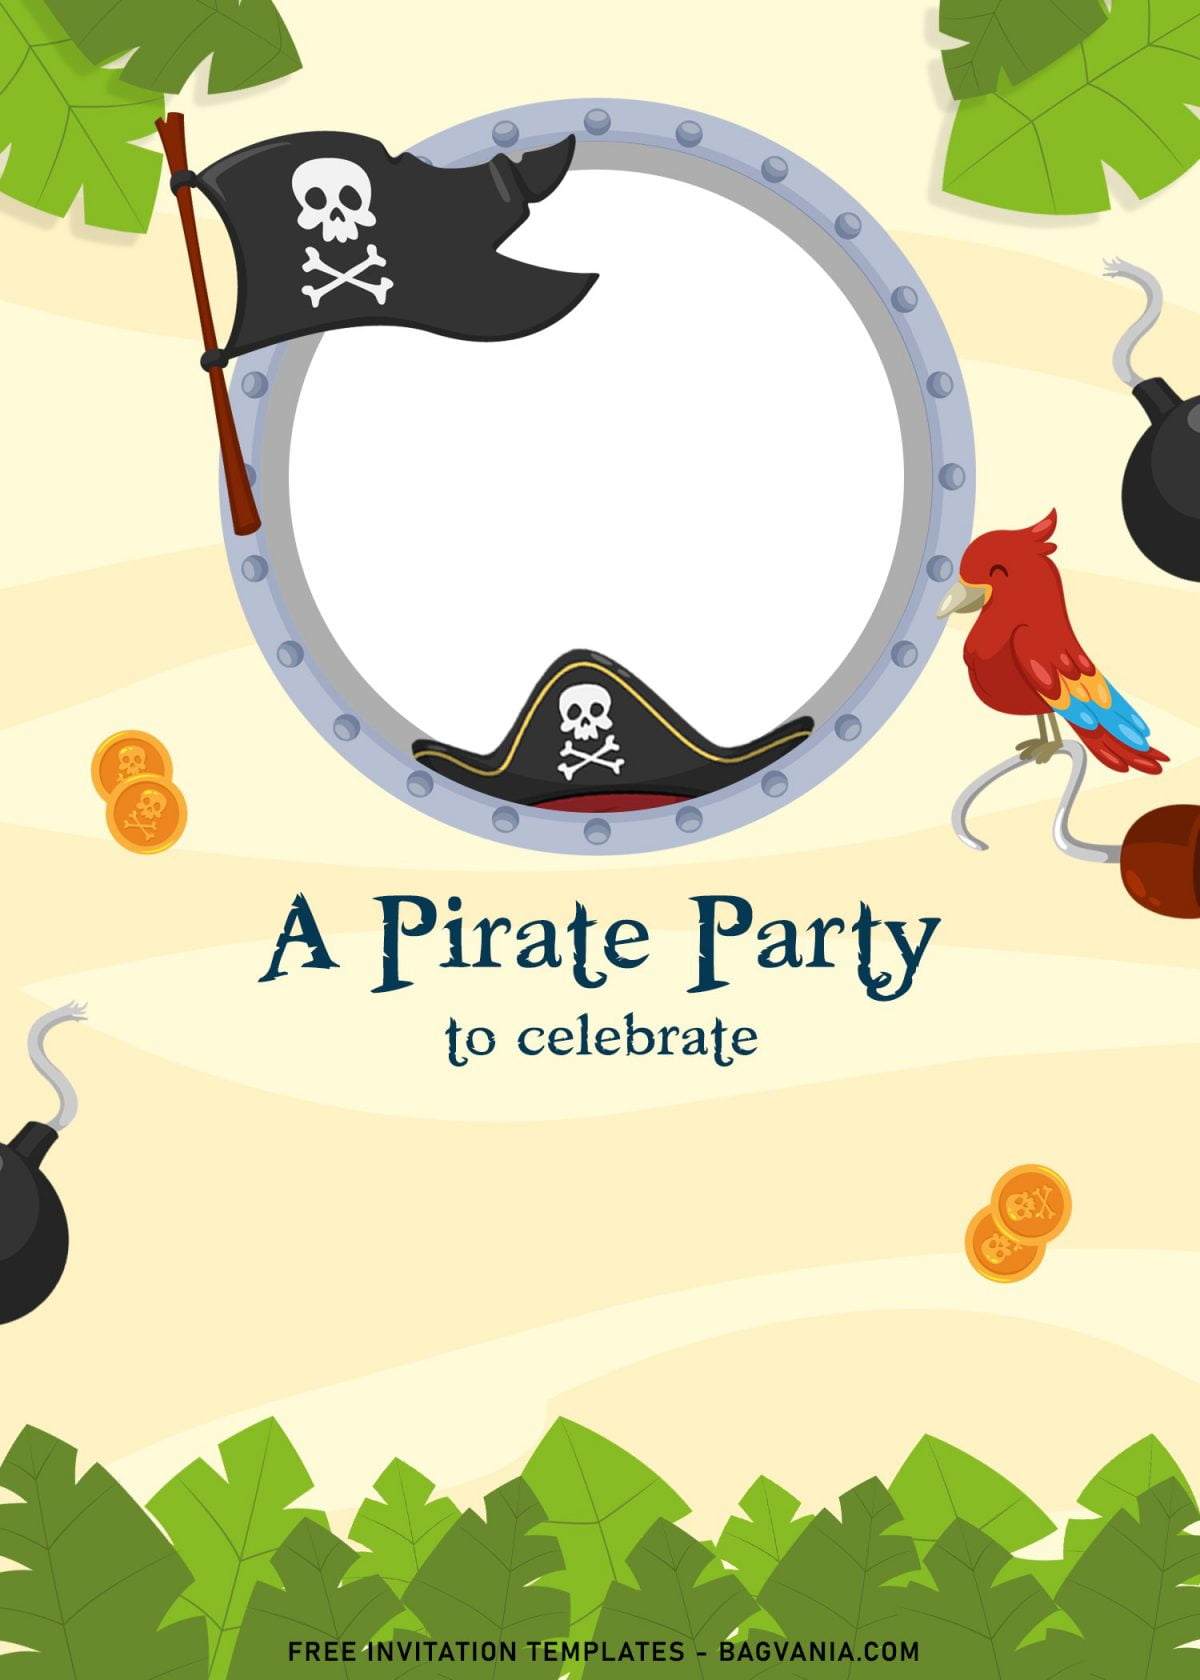 9+ Cute Pirate Birthday Invitation Templates For Your Son's Upcoming Birthday and has Pirate flag and Photo Frame